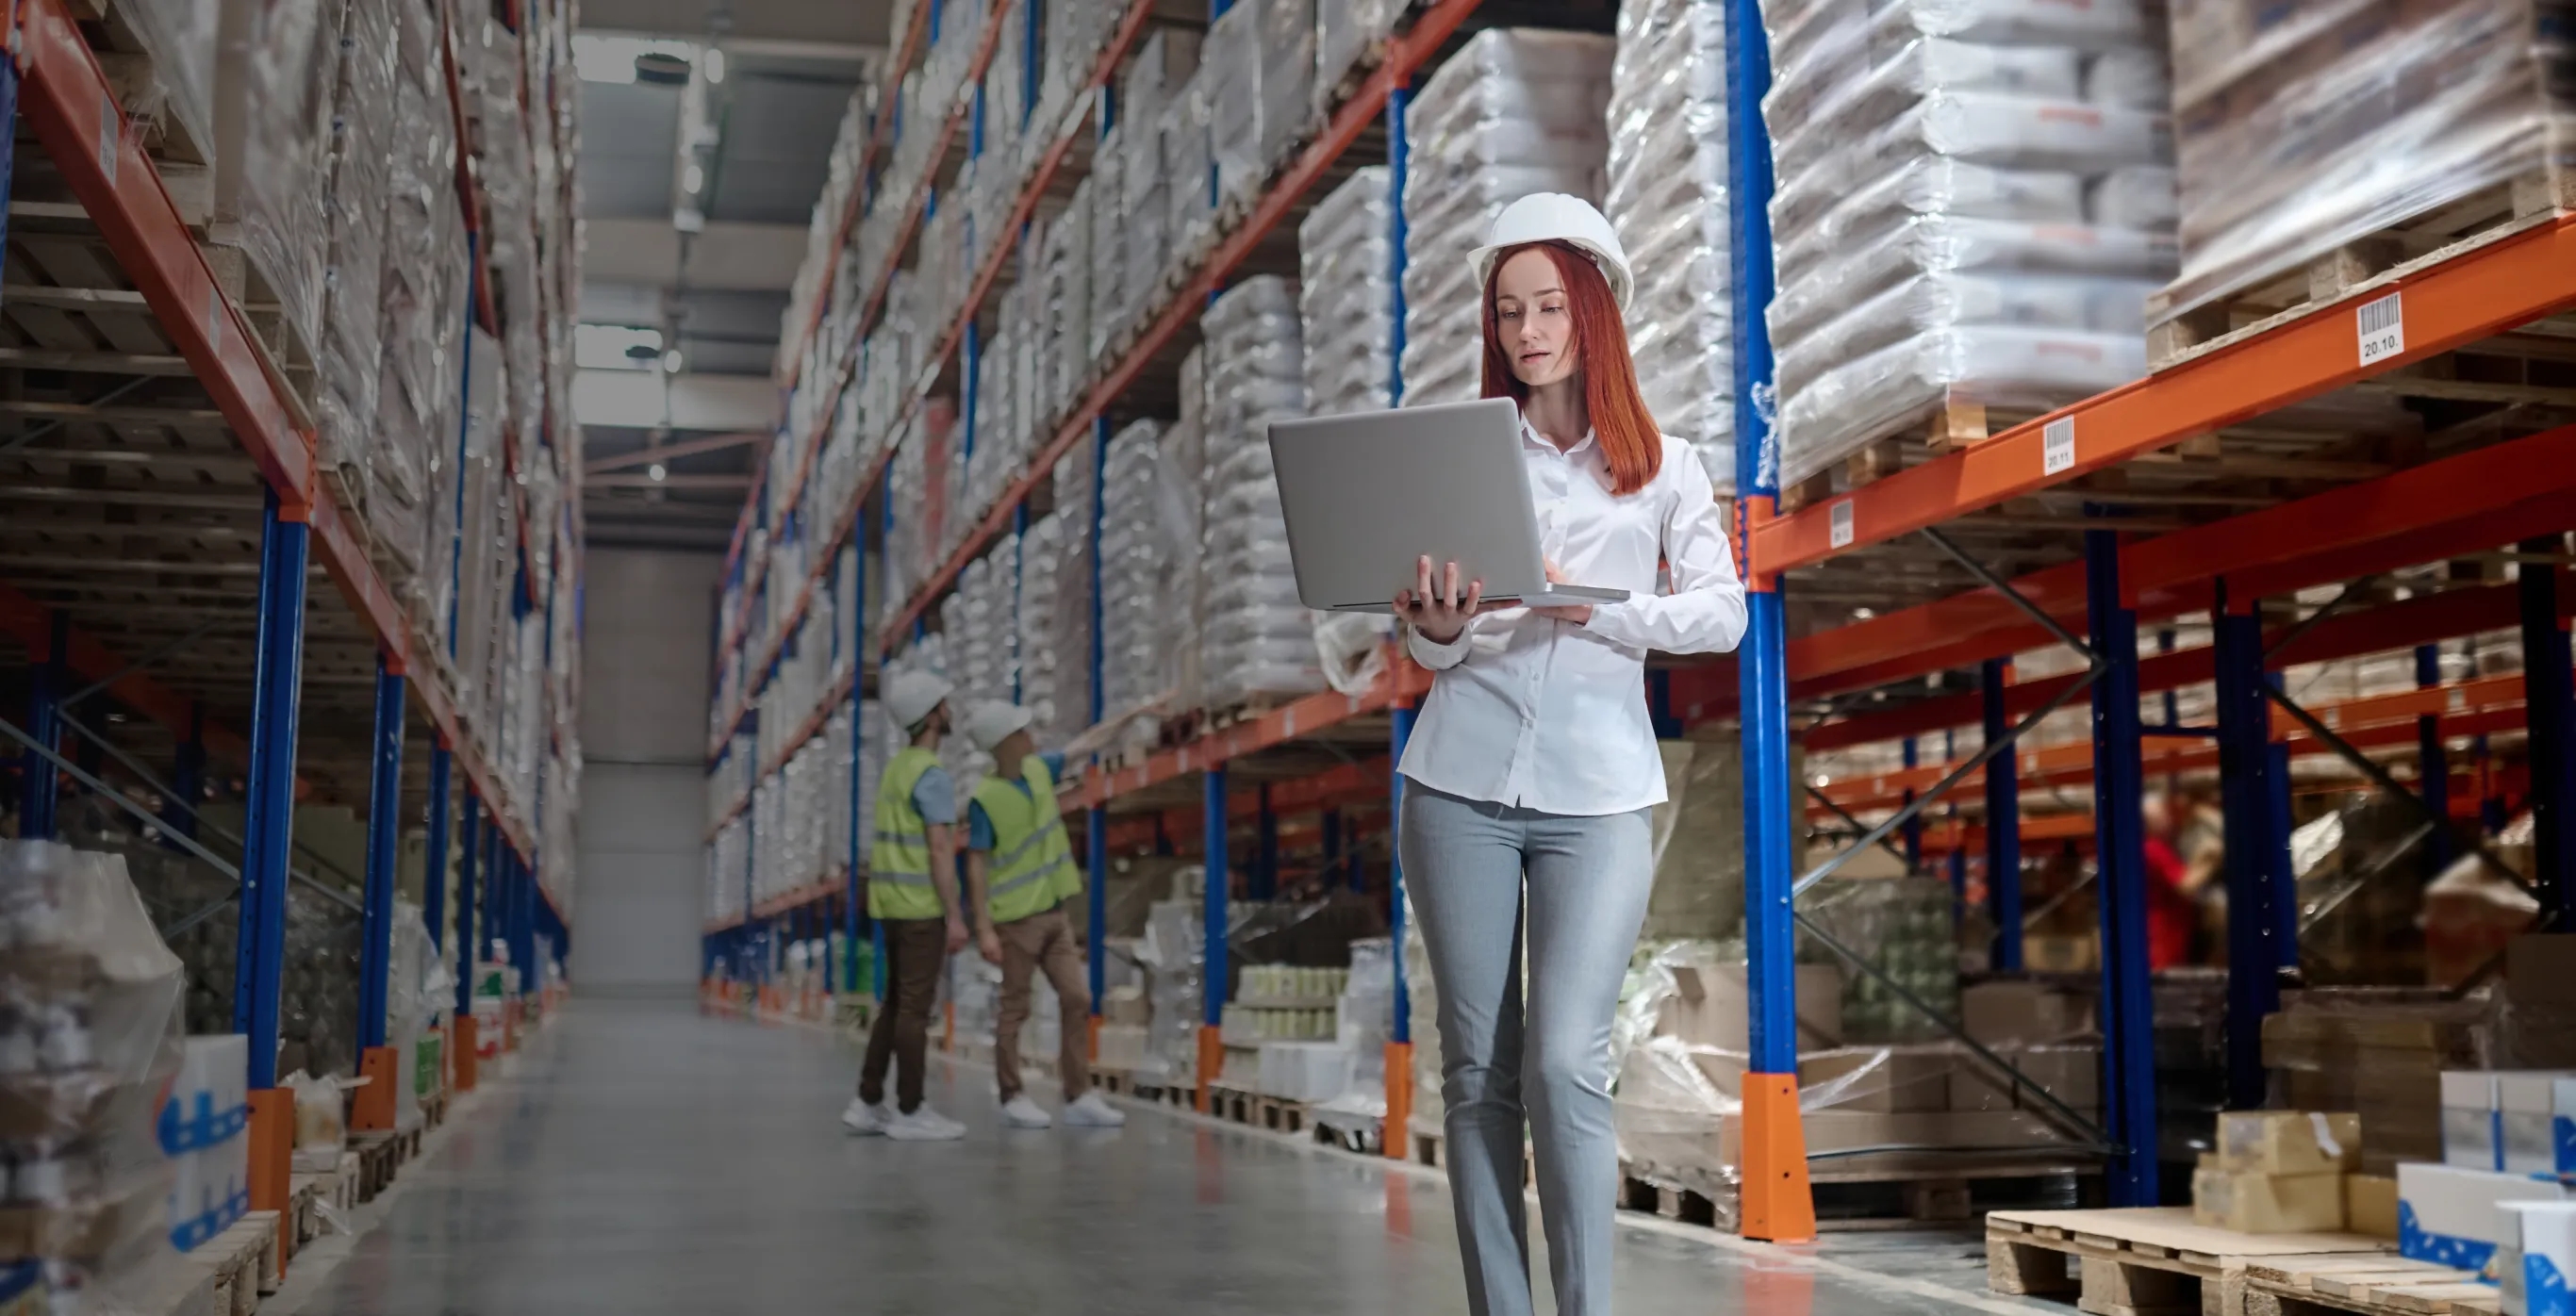 A woman in a white shirt and hat stands in a warehouse, working on a laptop, representing tech solutions for logistics.